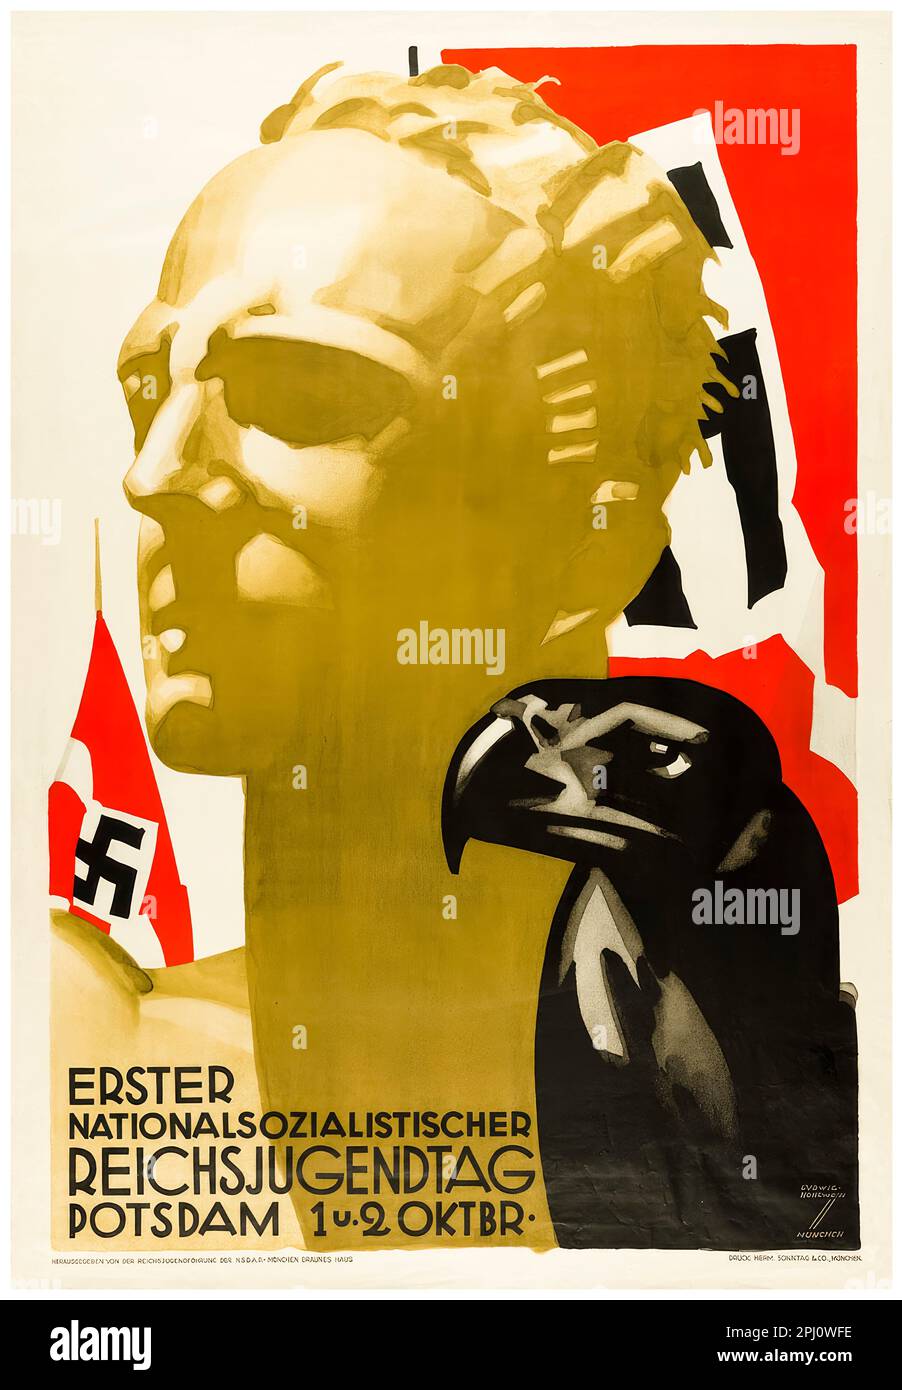 First National Socialist Reich Youth Day (Hitler Youth), Potsdam, October 1932, Nazi event poster by Ludwig Hohlwein, 1932 Stock Photo